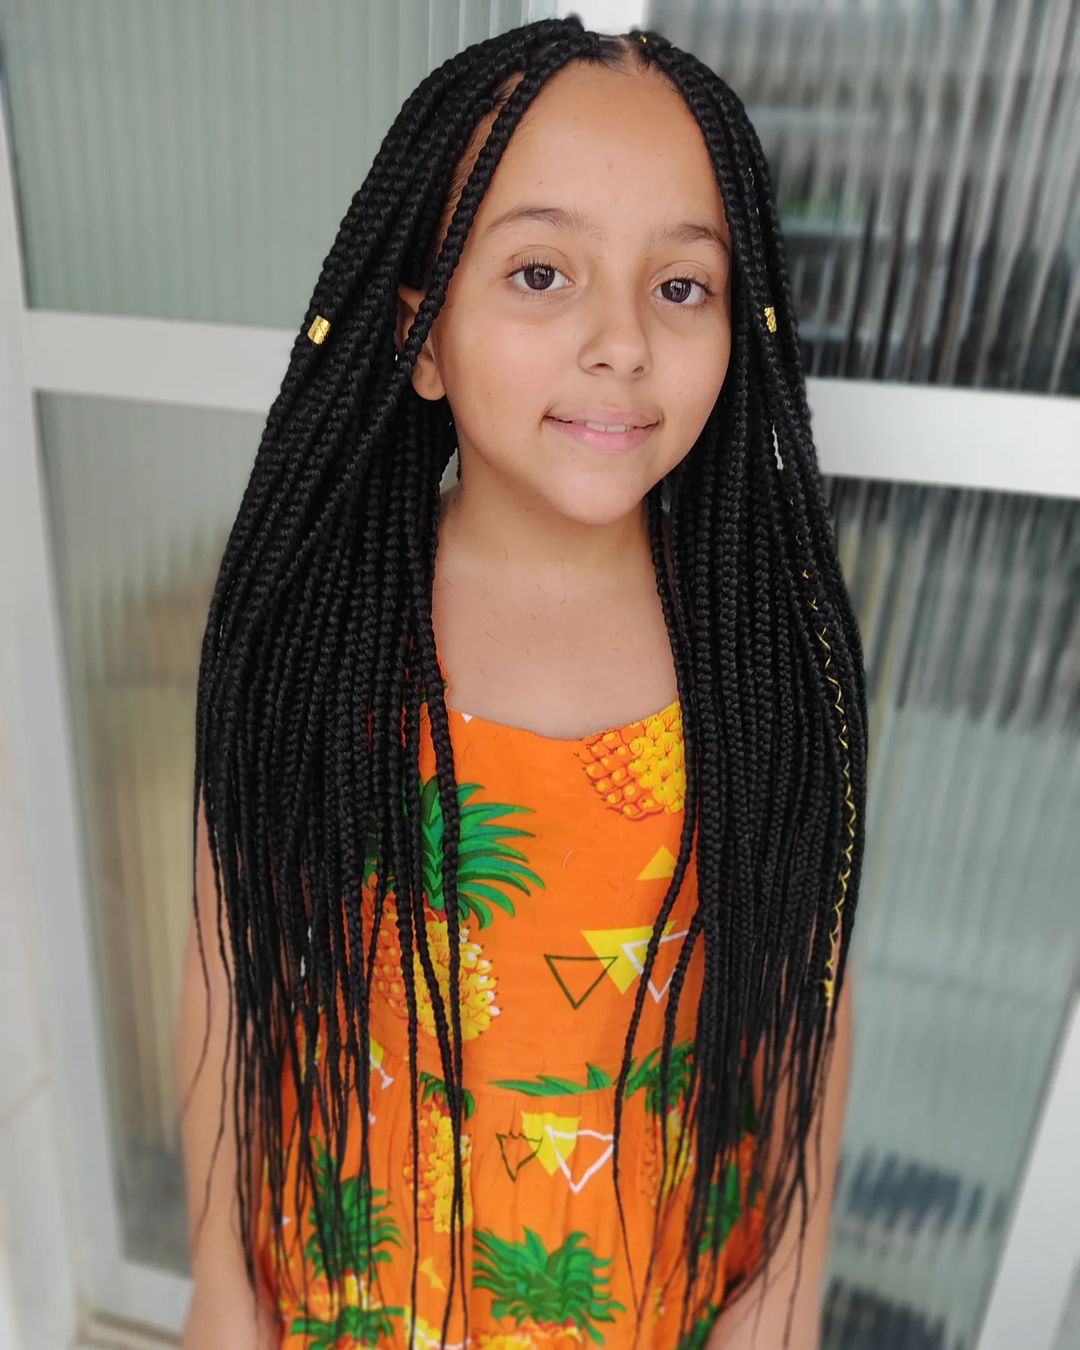 CAN WHITE KIDS WEAR BLACK HAIRSTYLES? PARENTS WEIGH-IN